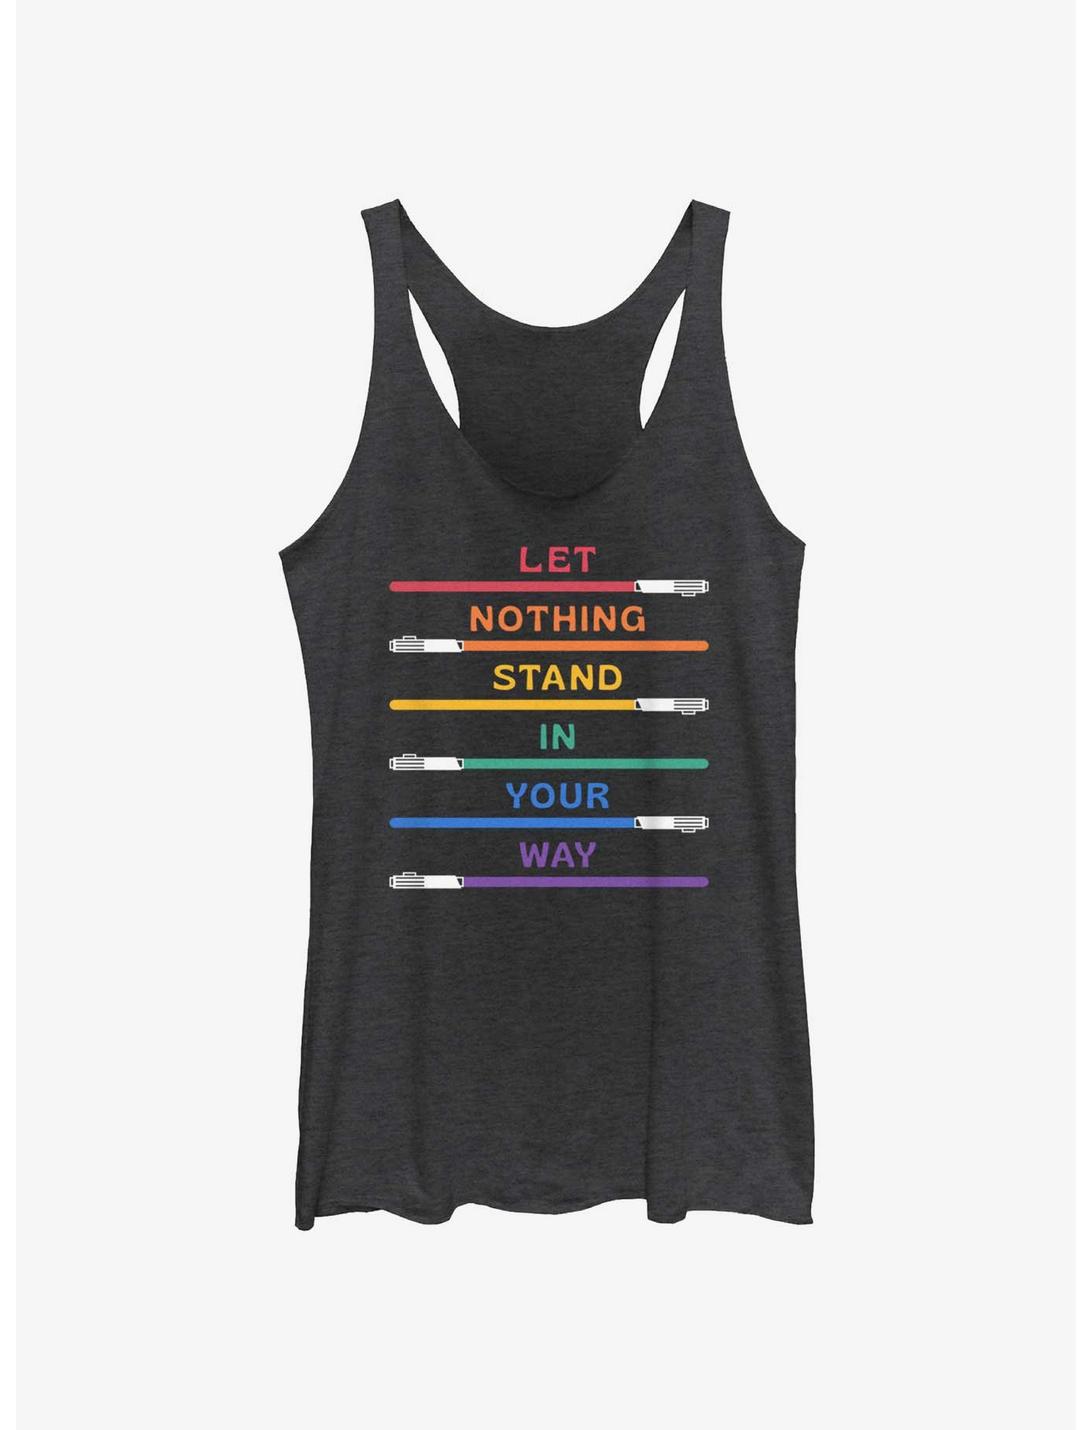 Star Wars Nothing Stand Your Way Pride Tank, BLK HTR, hi-res